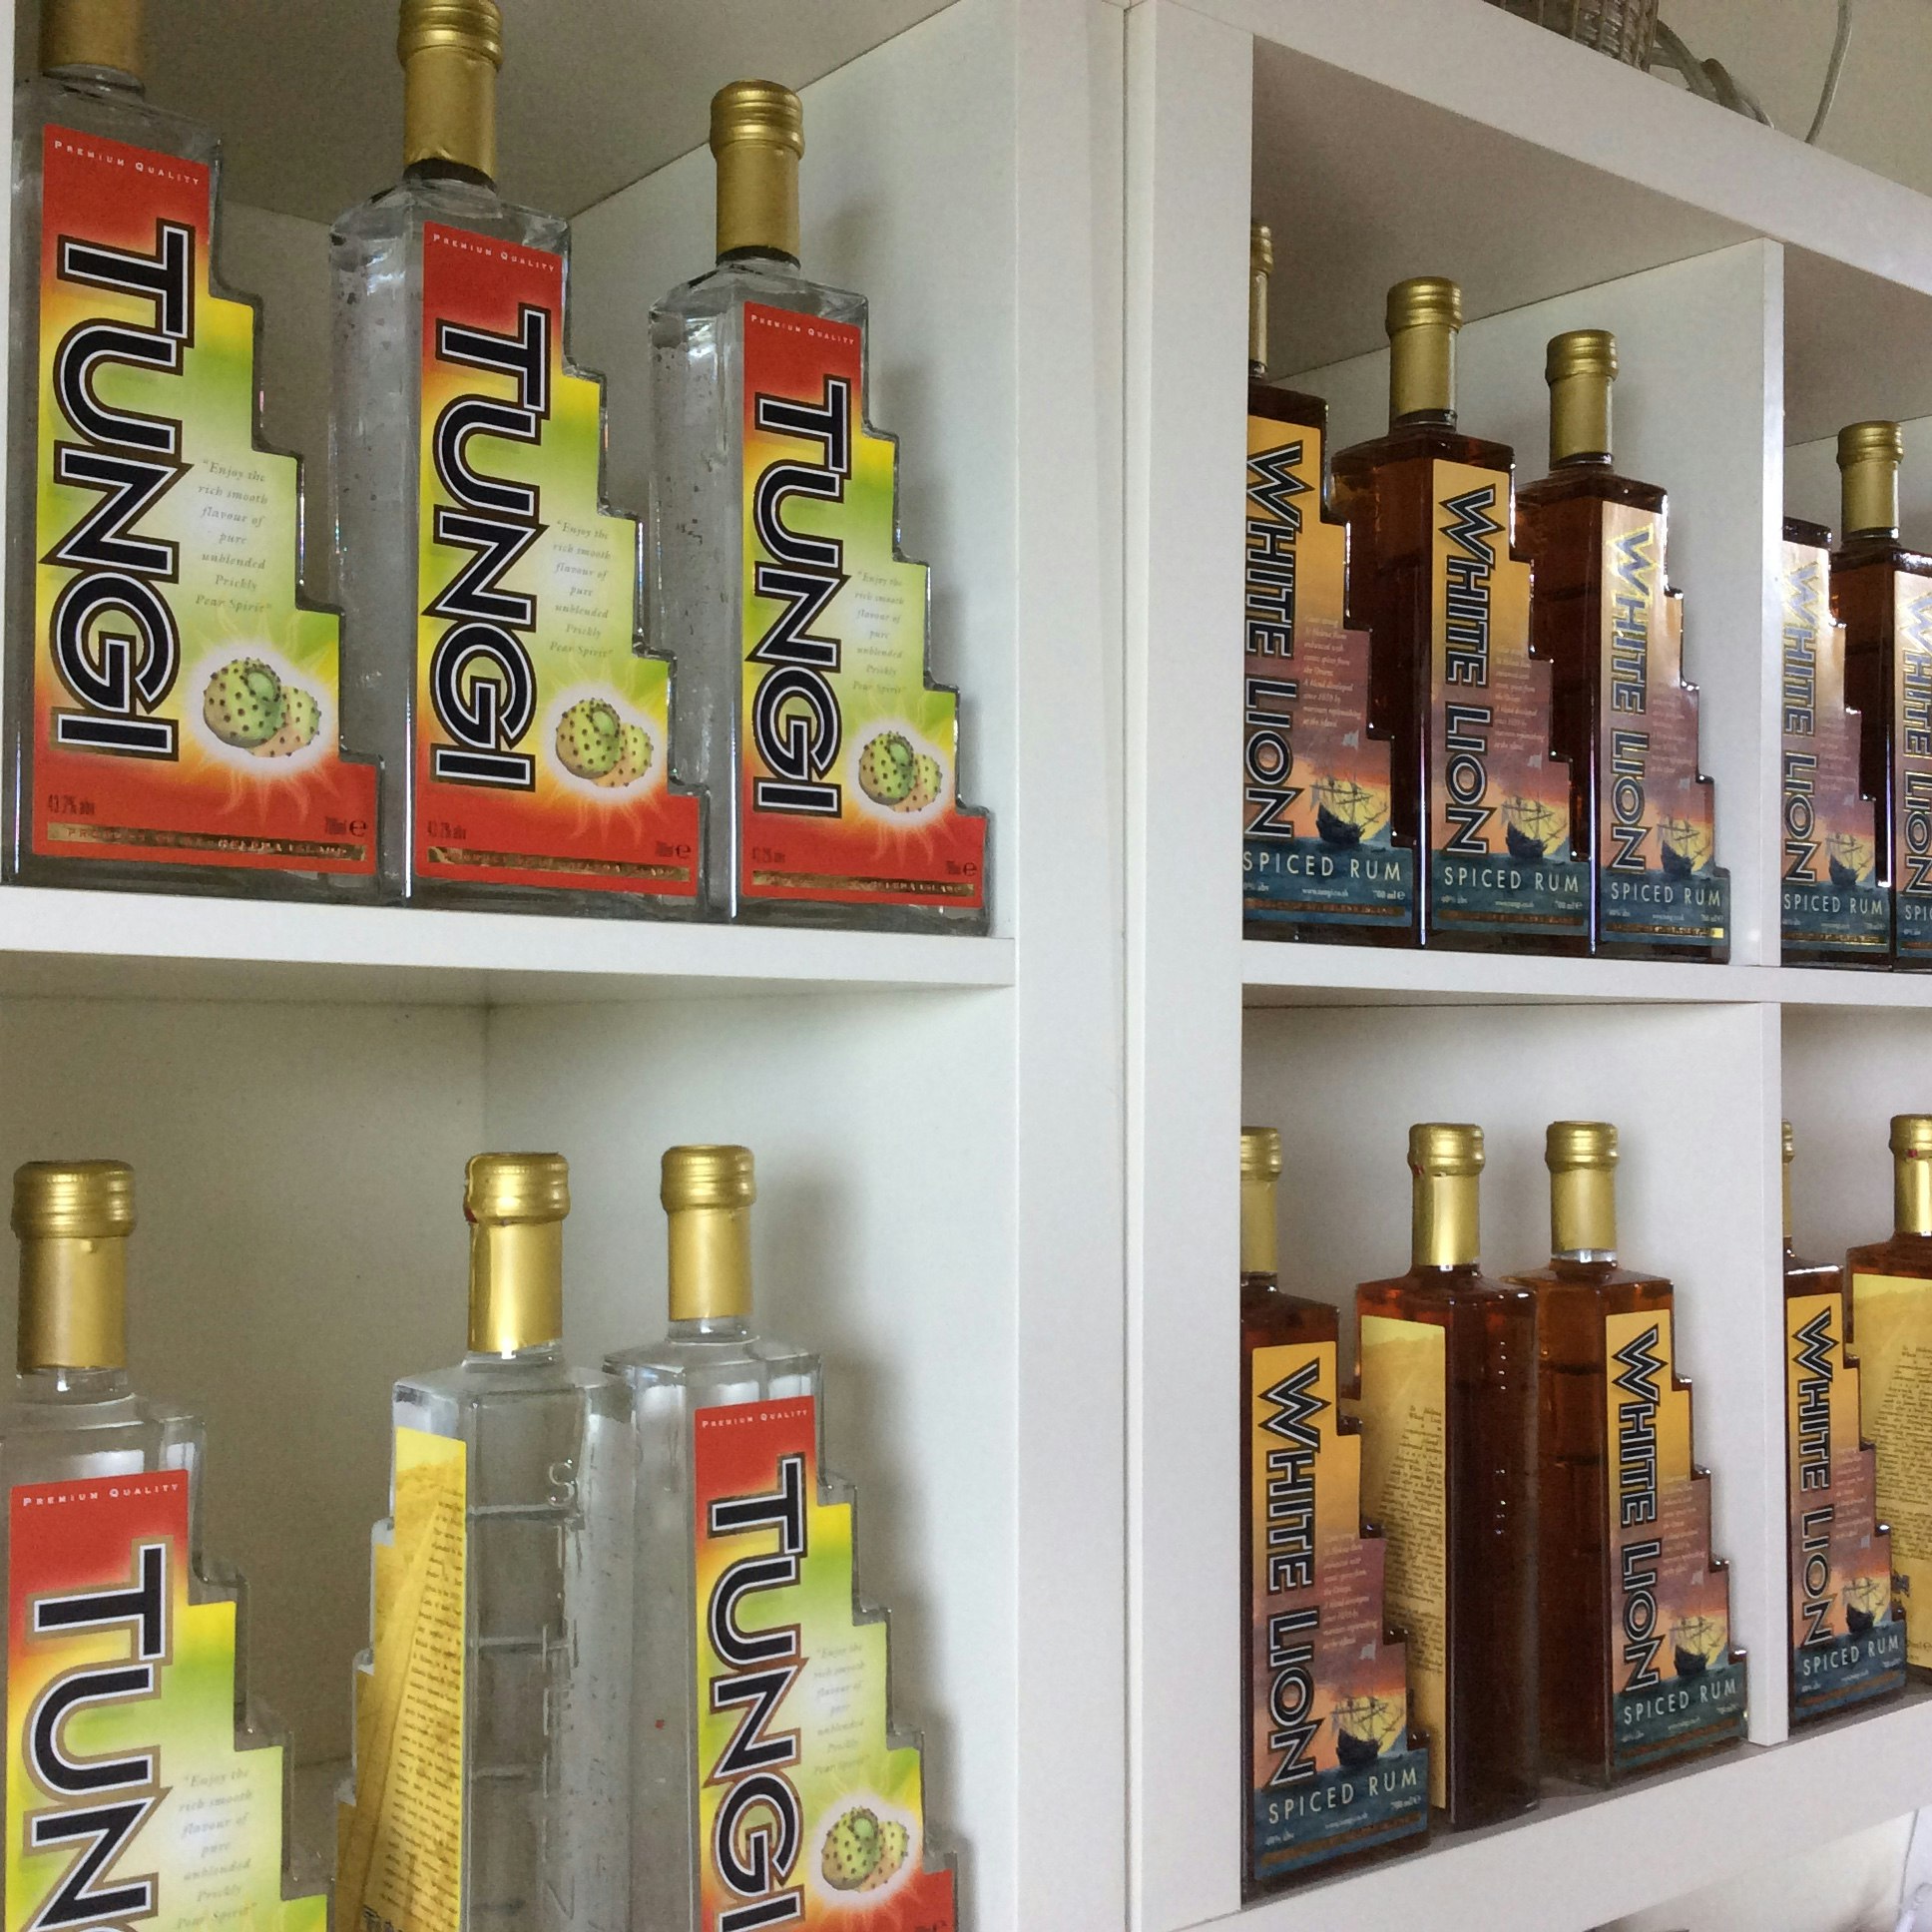 Step-shaded clear bottles of Tungi sit atop one another; next to these are identical shelves with brown step-shaped bottles of spiced rum.